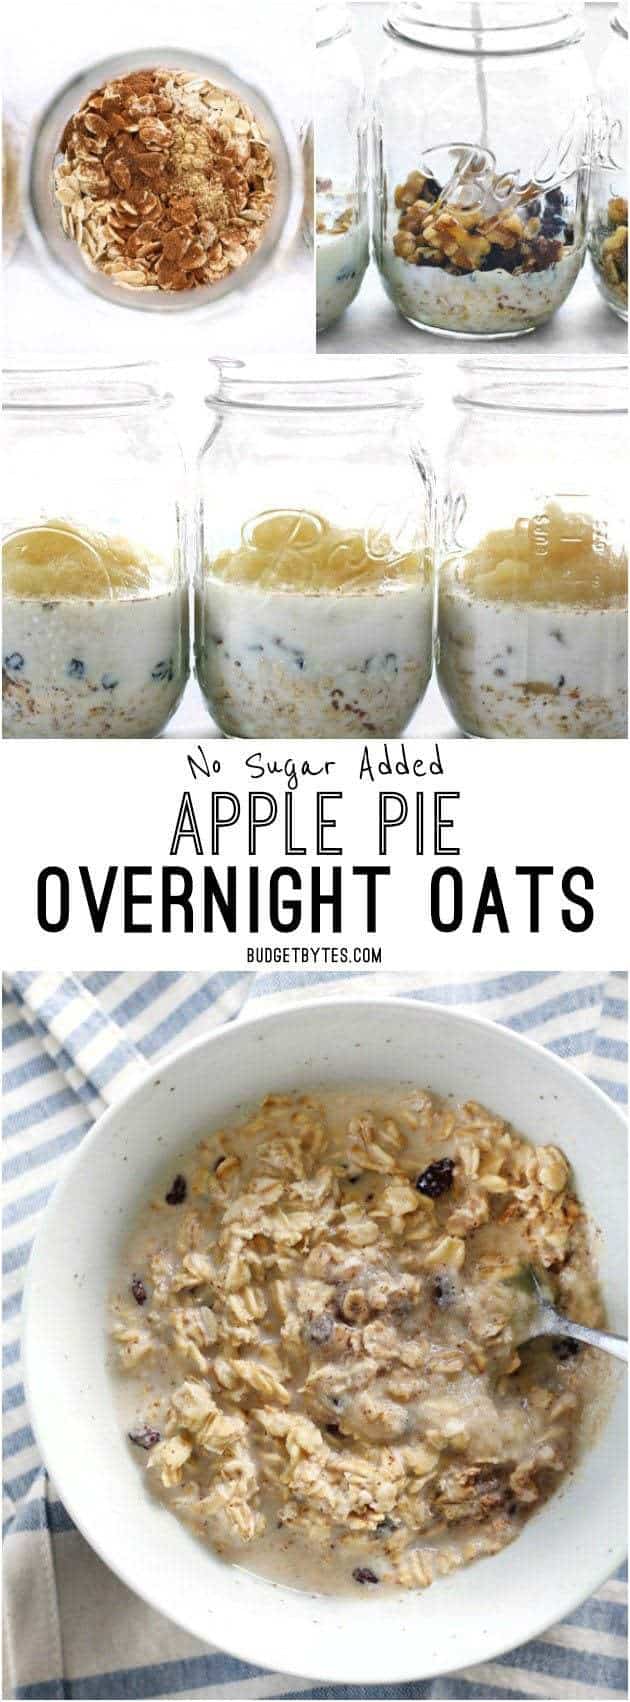 No Sugar Added Apple Pie Overnight Oats are the perfect healthy and delicious make-ahead breakfast for summer. BudgetBytes.com